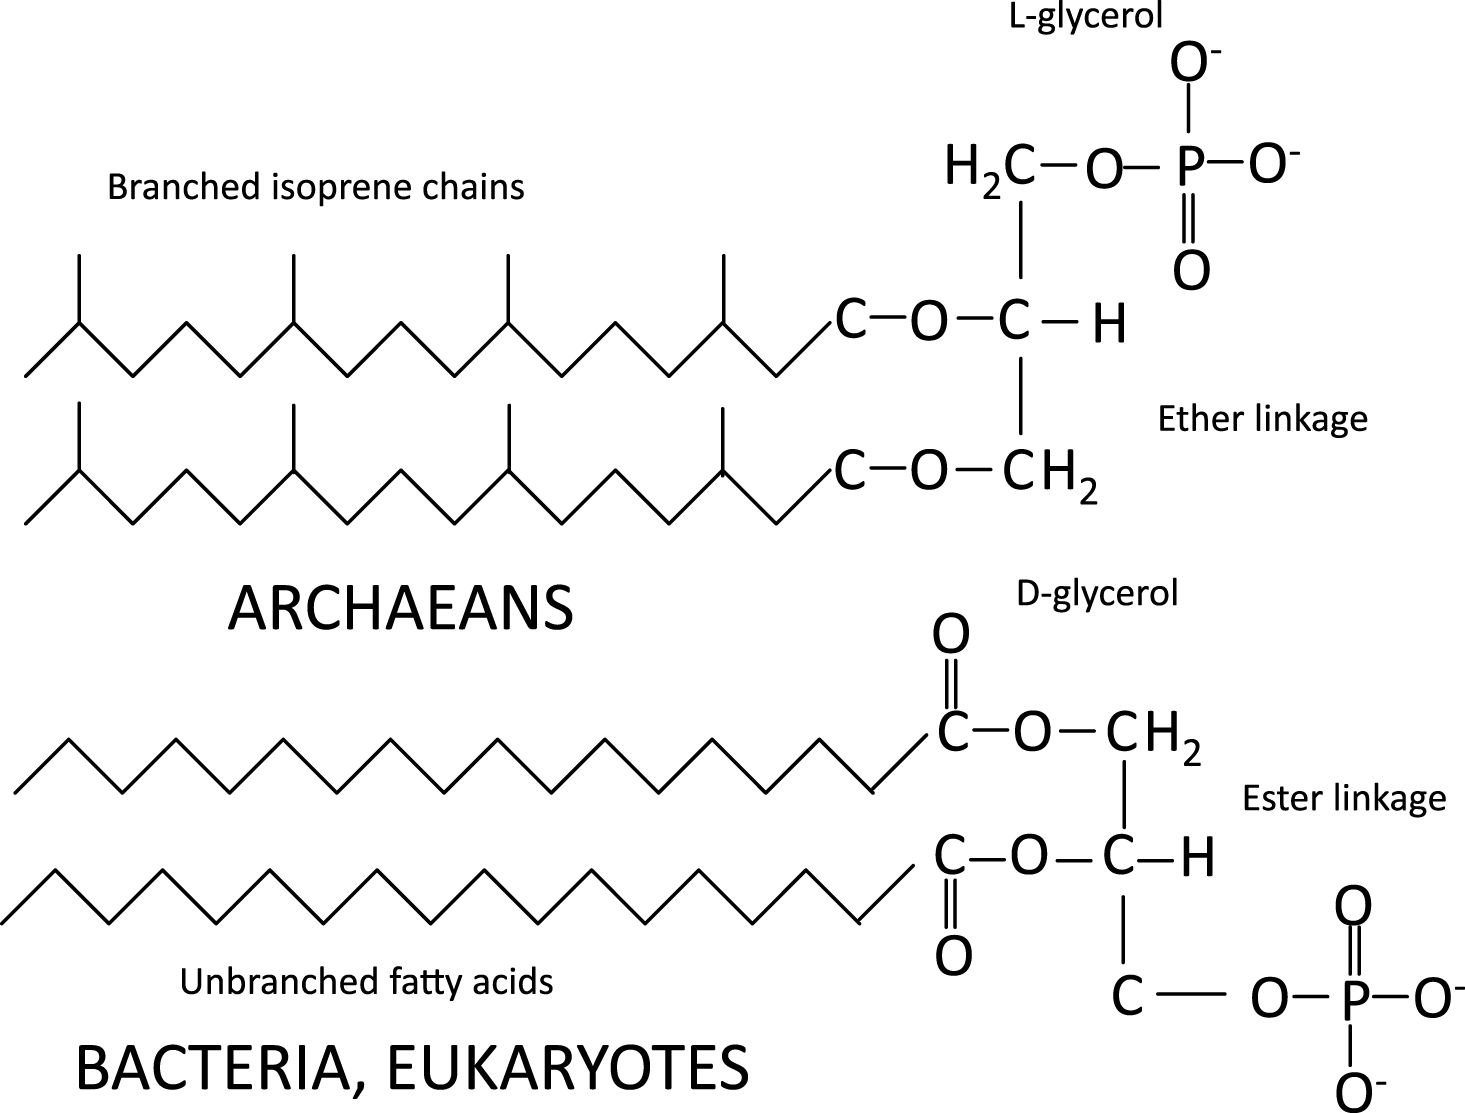 Cell membrane composition of archaeans, bacteria and eukaryotes. Adapted from http://www.ucmp.berkeley.edu/archaea/archaeamm.html and http://wikipedia.org/wiki/Archaea.